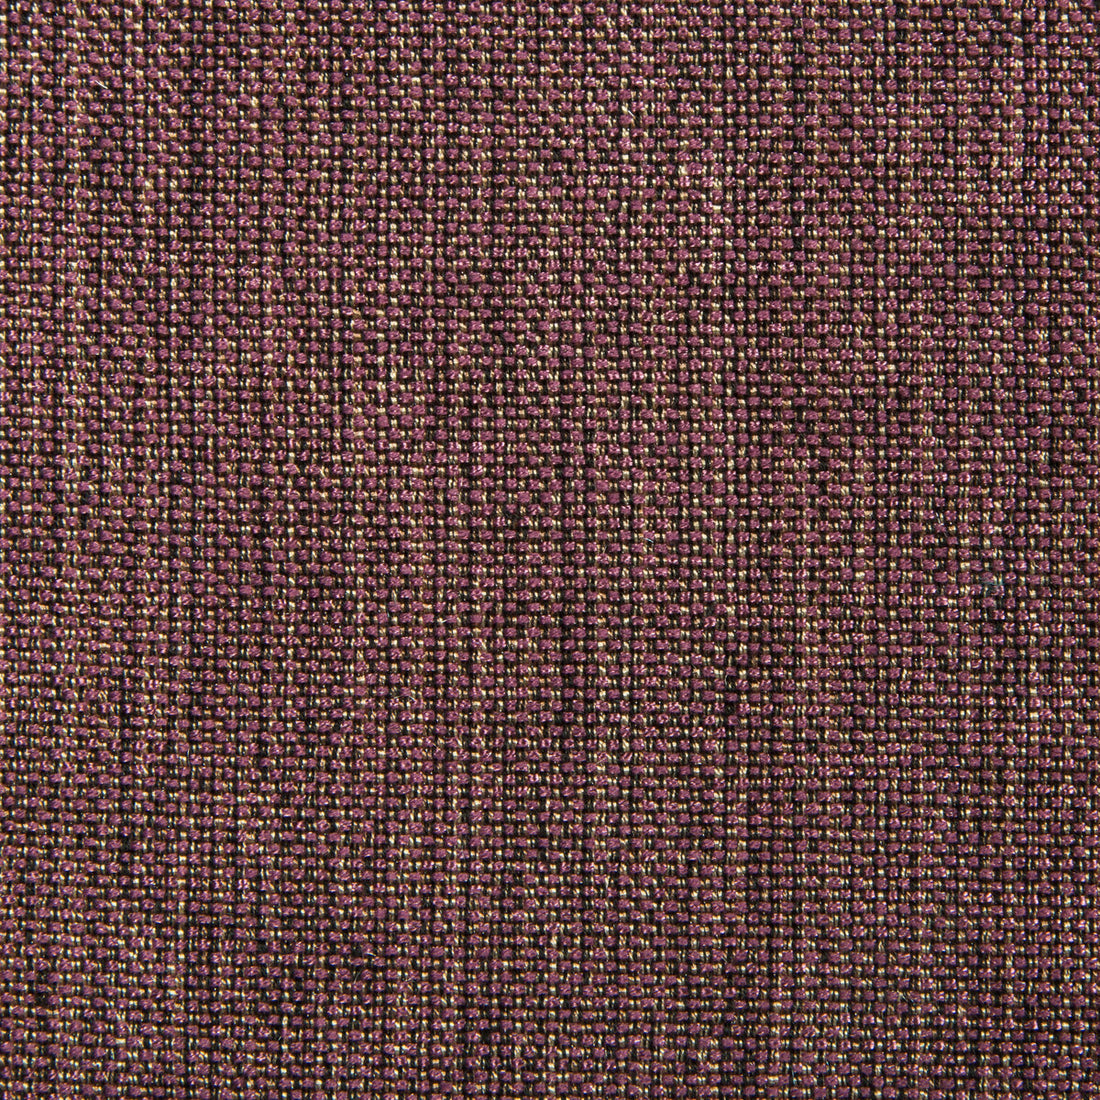 Kravet Contract fabric in 34926-810 color - pattern 34926.810.0 - by Kravet Contract